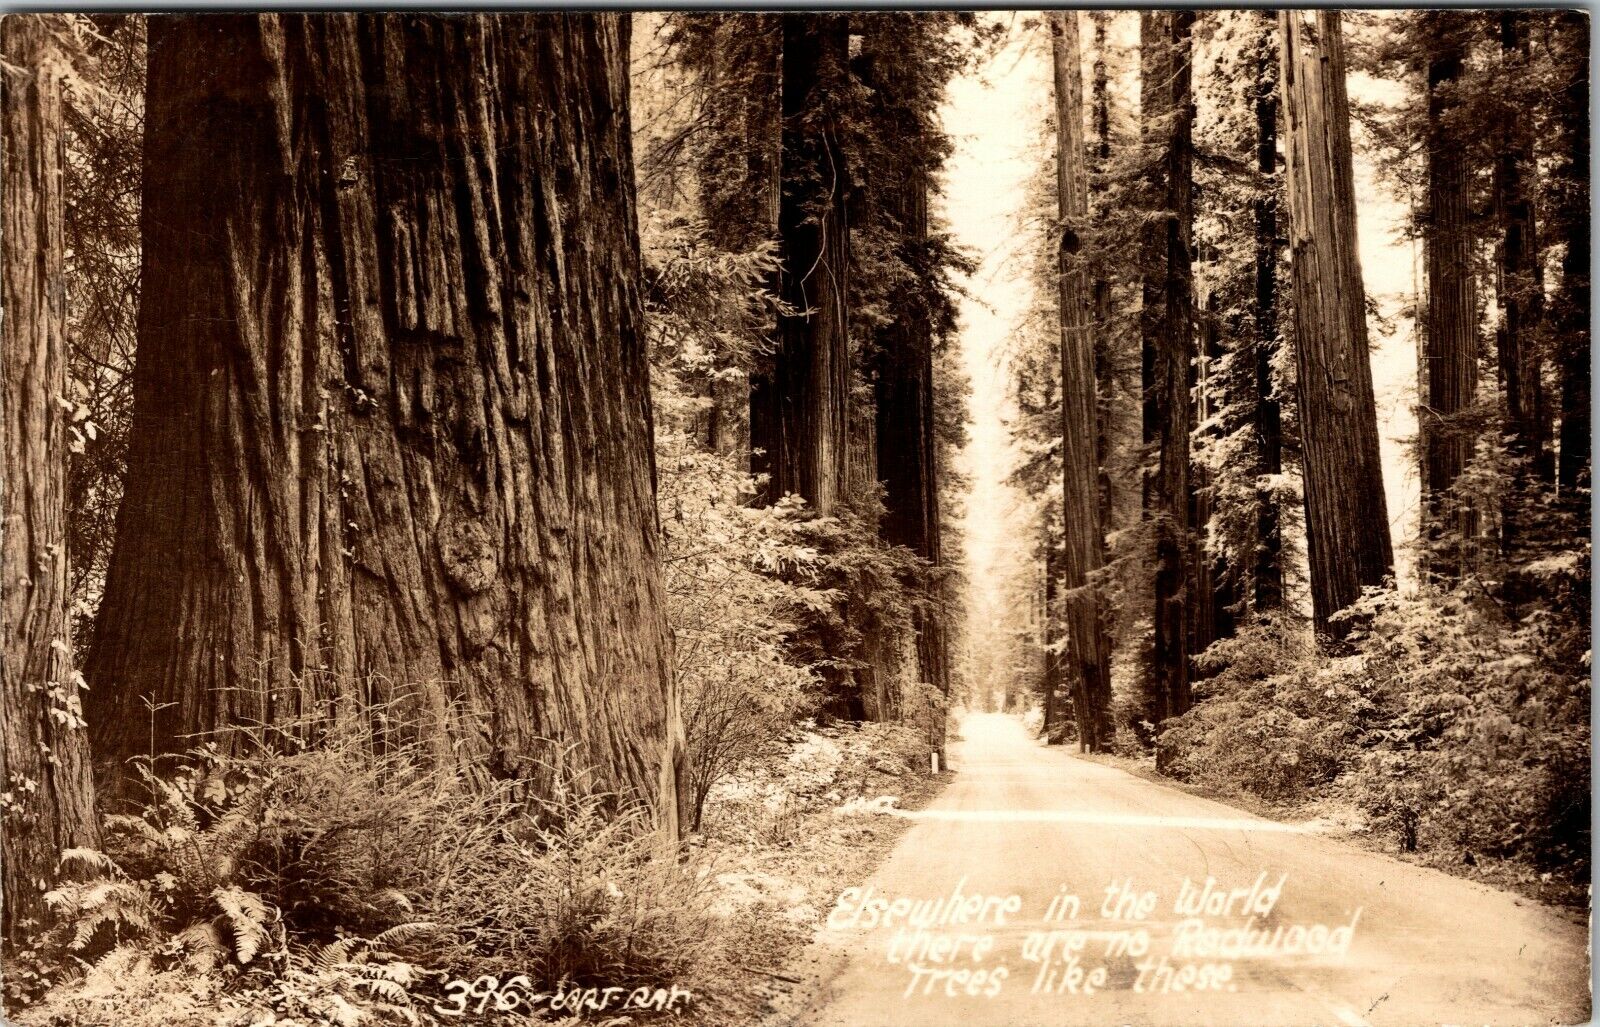 1945 California Redwood Trees No Where Else In The World Antique Postcard 